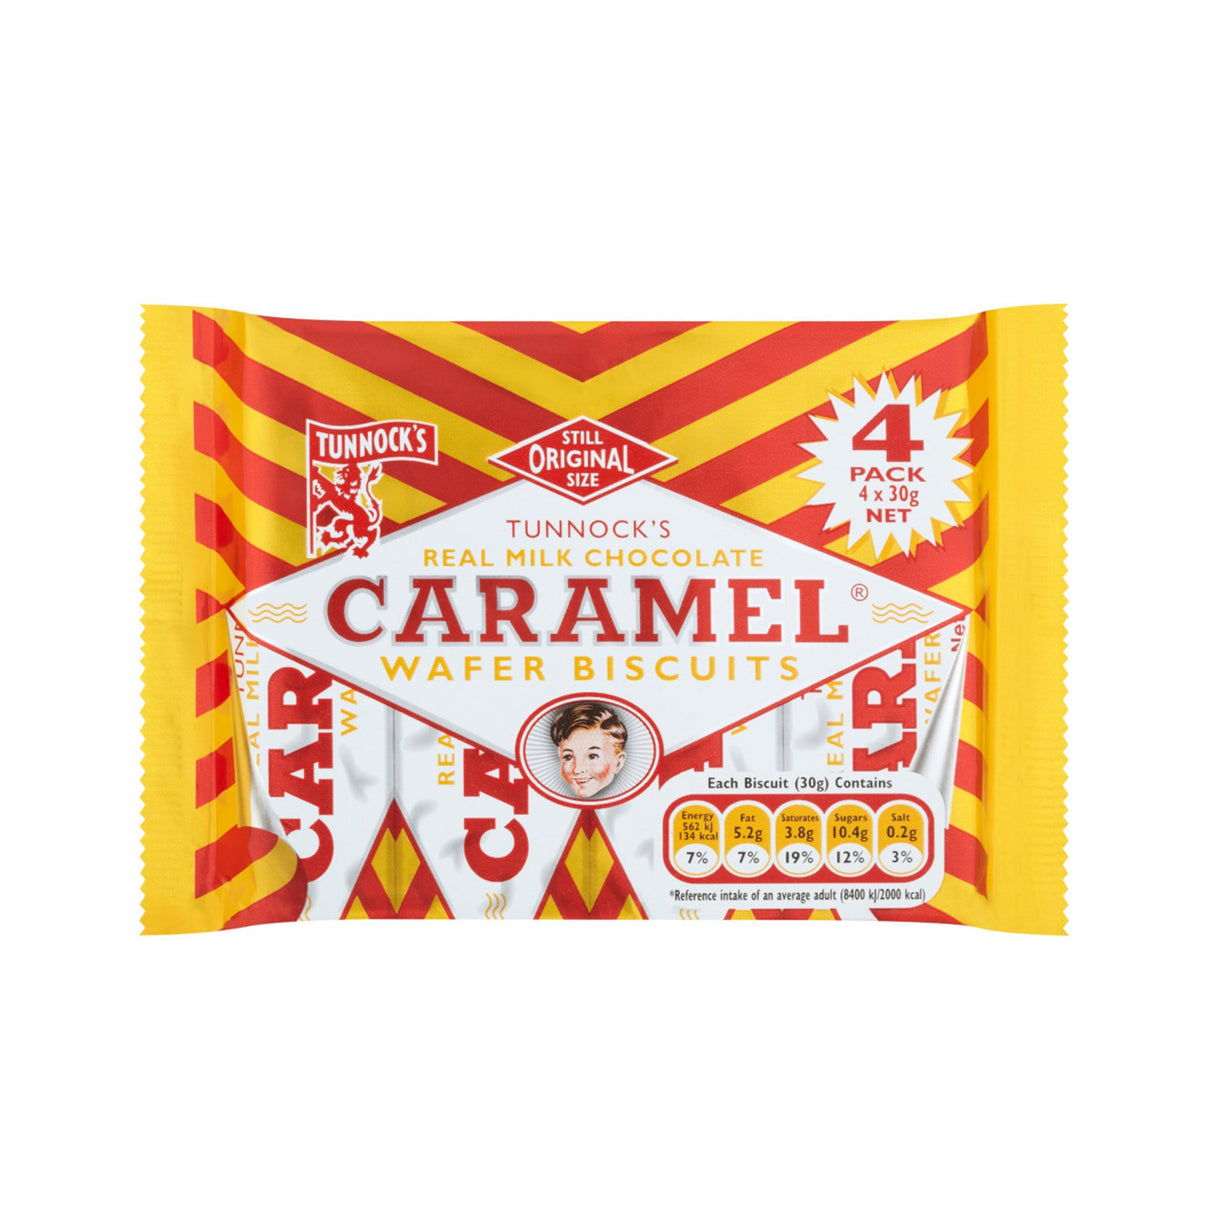 Tunnock's Caramel Wafer Biscuits Milk Chocolate 120g - 4 Pack